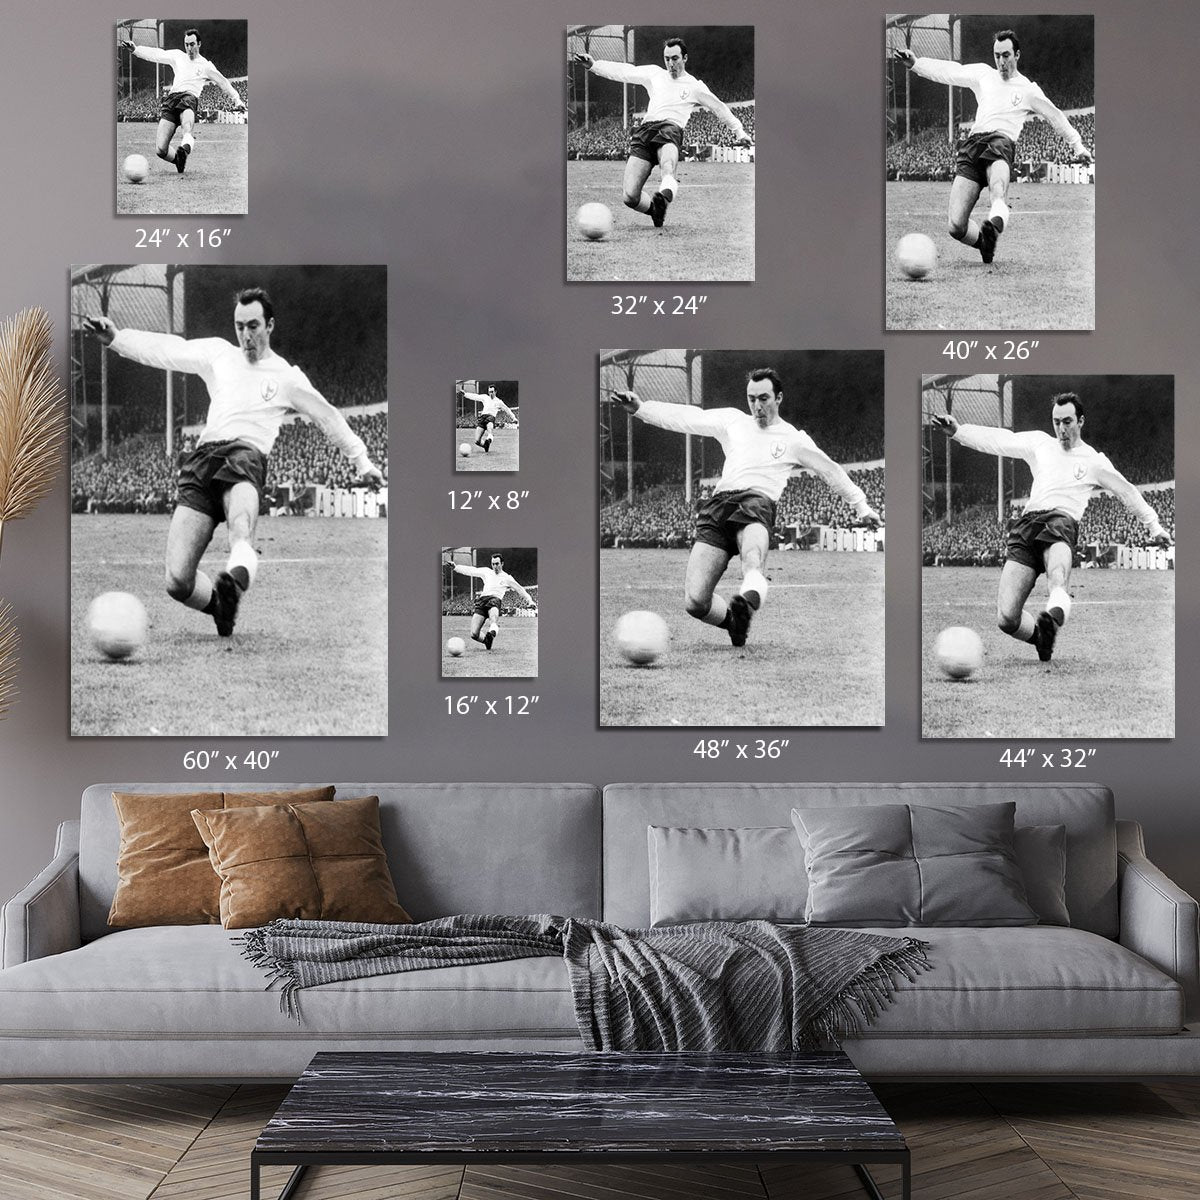 Jimmy Greaves 1966 Canvas Print or Poster